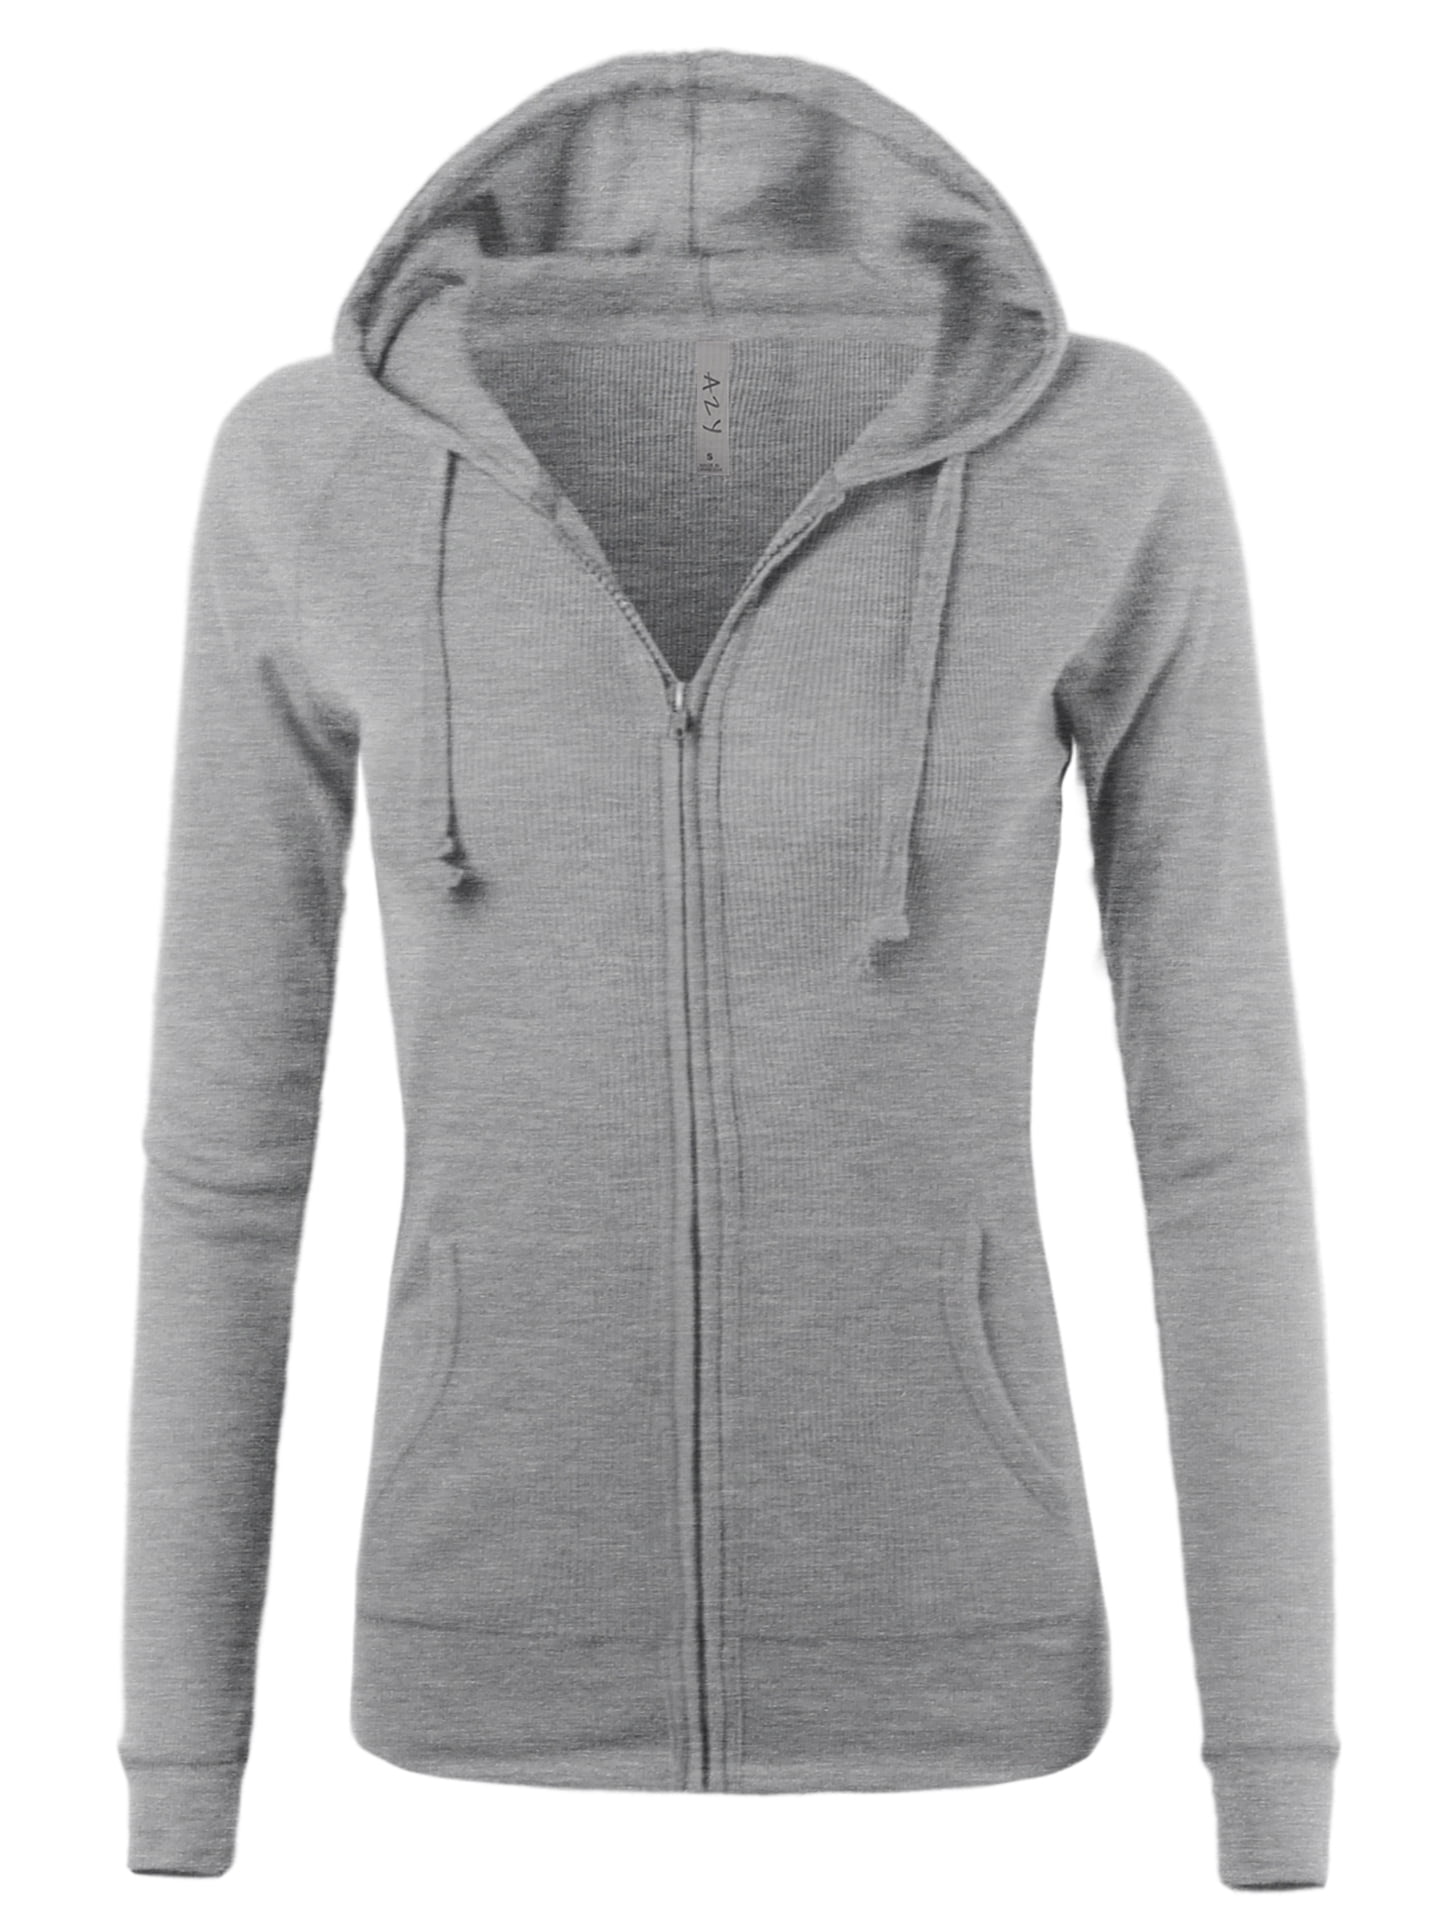 A2Y - A2Y Women's Casual Fitted Lightweight Pocket Zip Up Hoodie